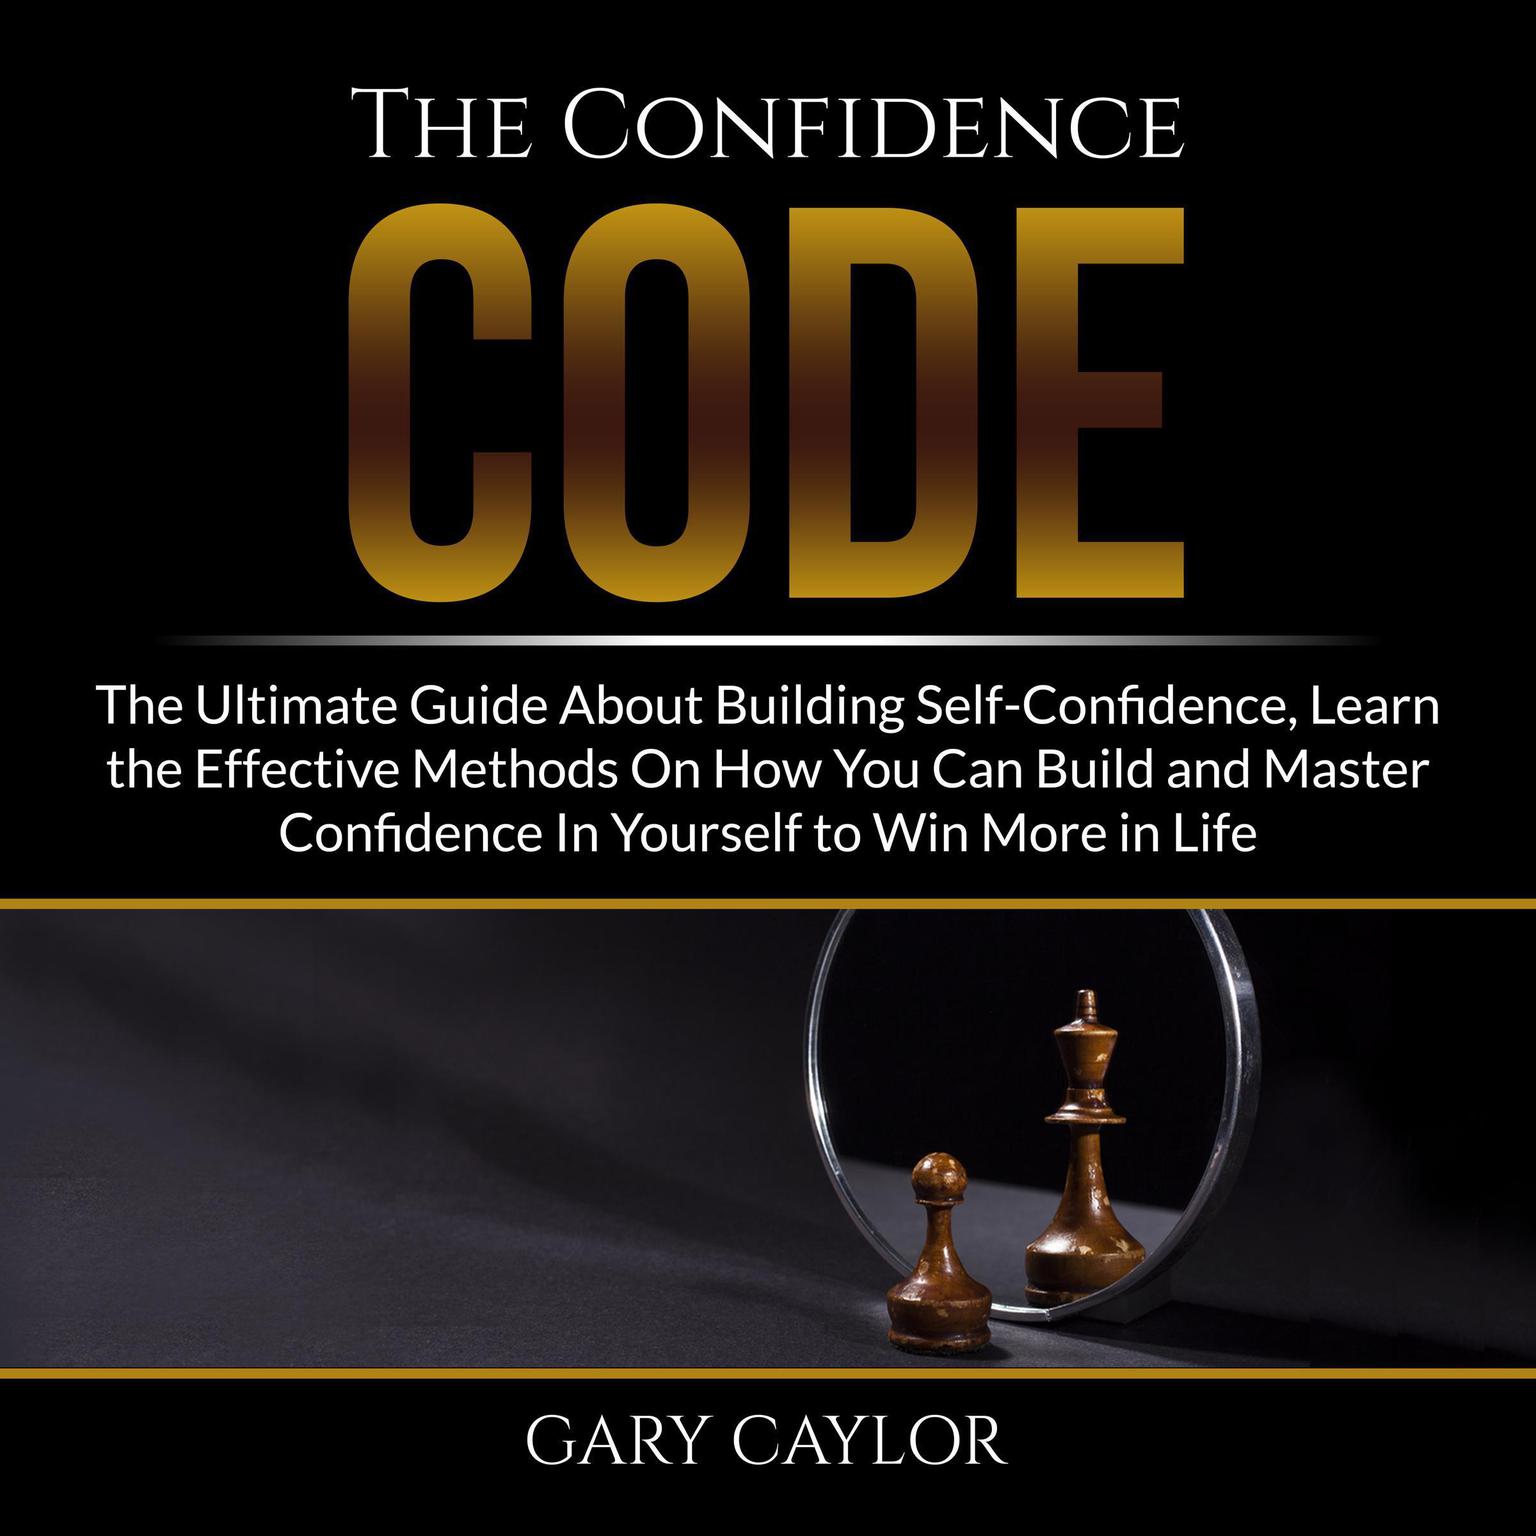 The Confidence Code: The Ultimate Guide About Building Self-Confidence, Learn the Effective Methods On How You Can Build and Master Confidence In Yourself to Win More in Life Audiobook, by Gary Caylor